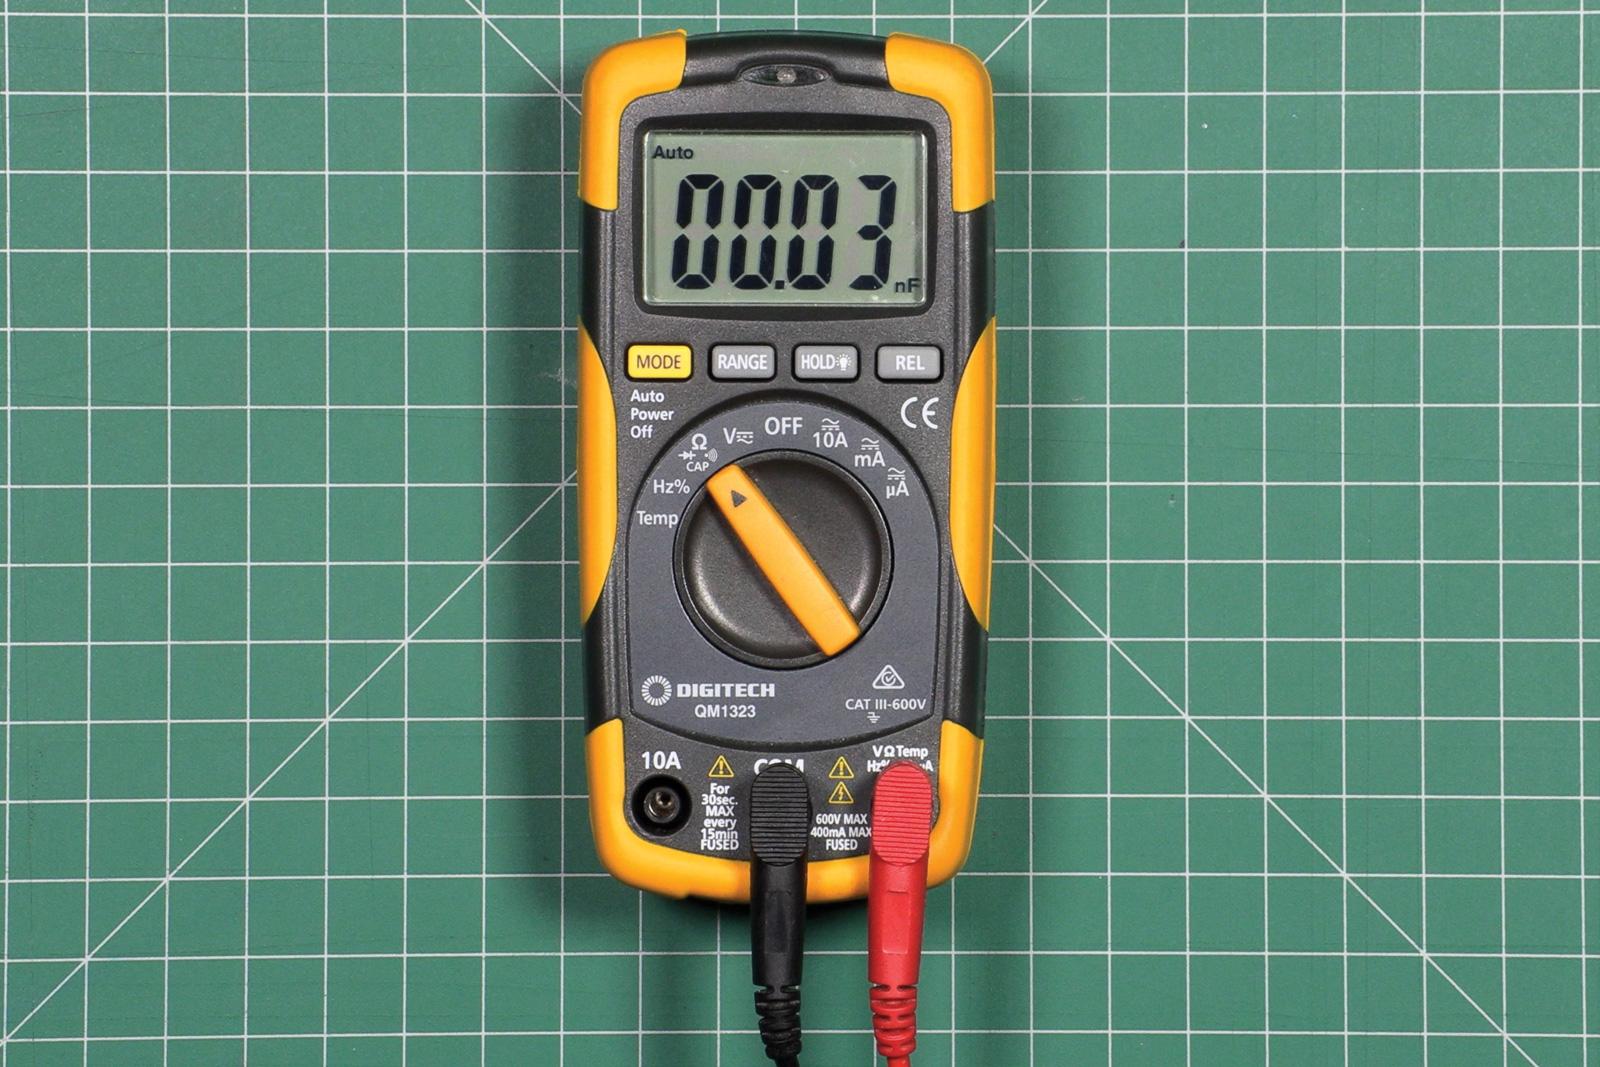 Multimeter Illustration. Also Known As A Volt/ohm Meter Used To